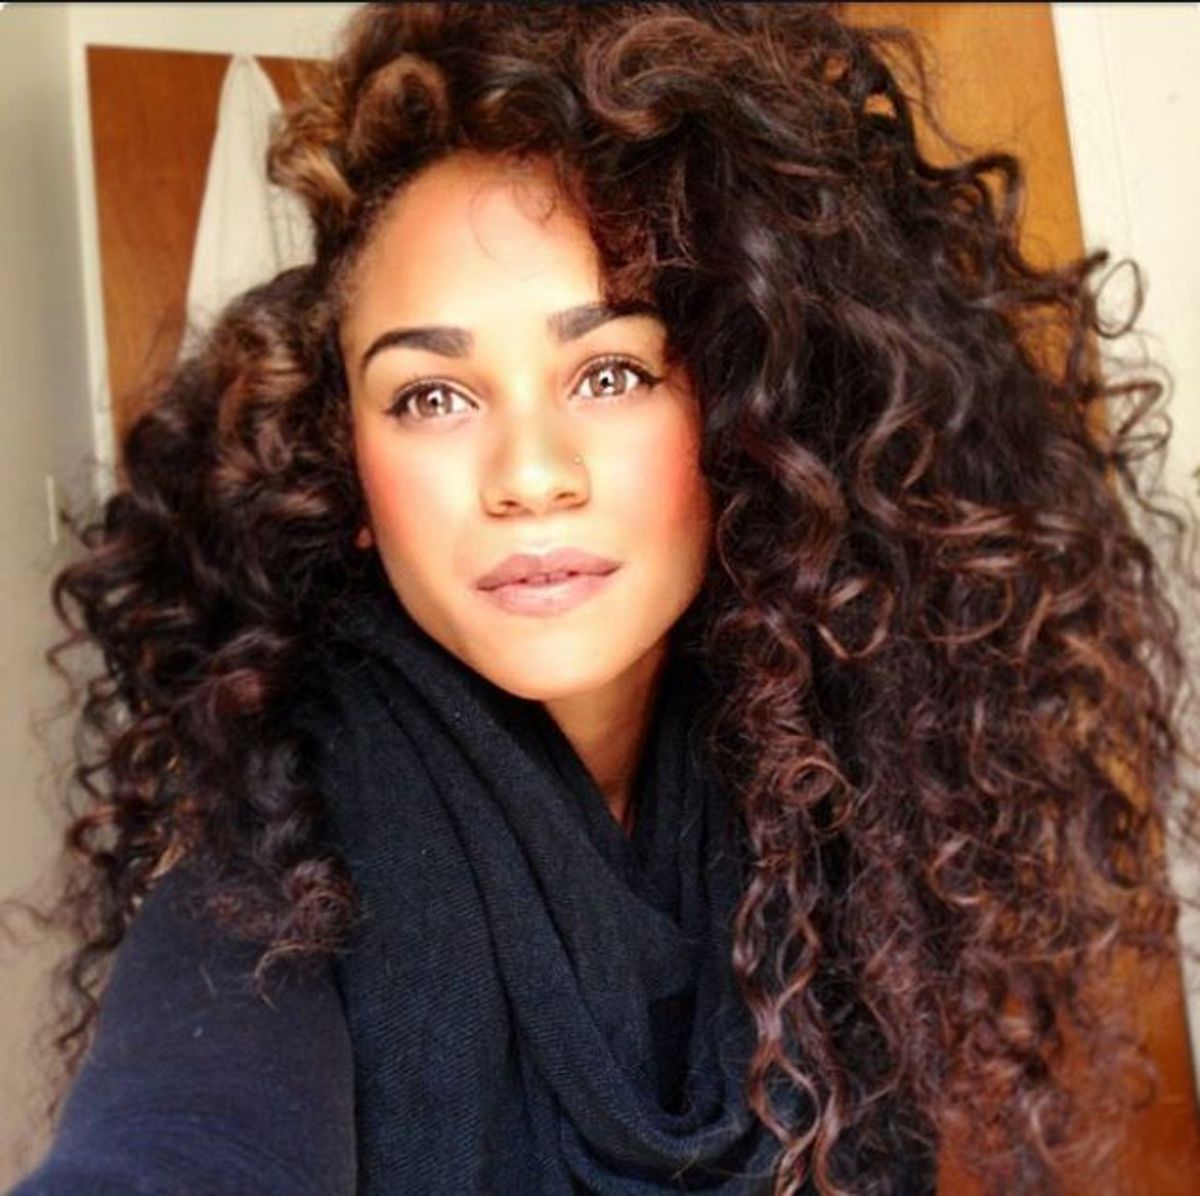 16 Things All Naturally Curly Haired Girls Know Too Well